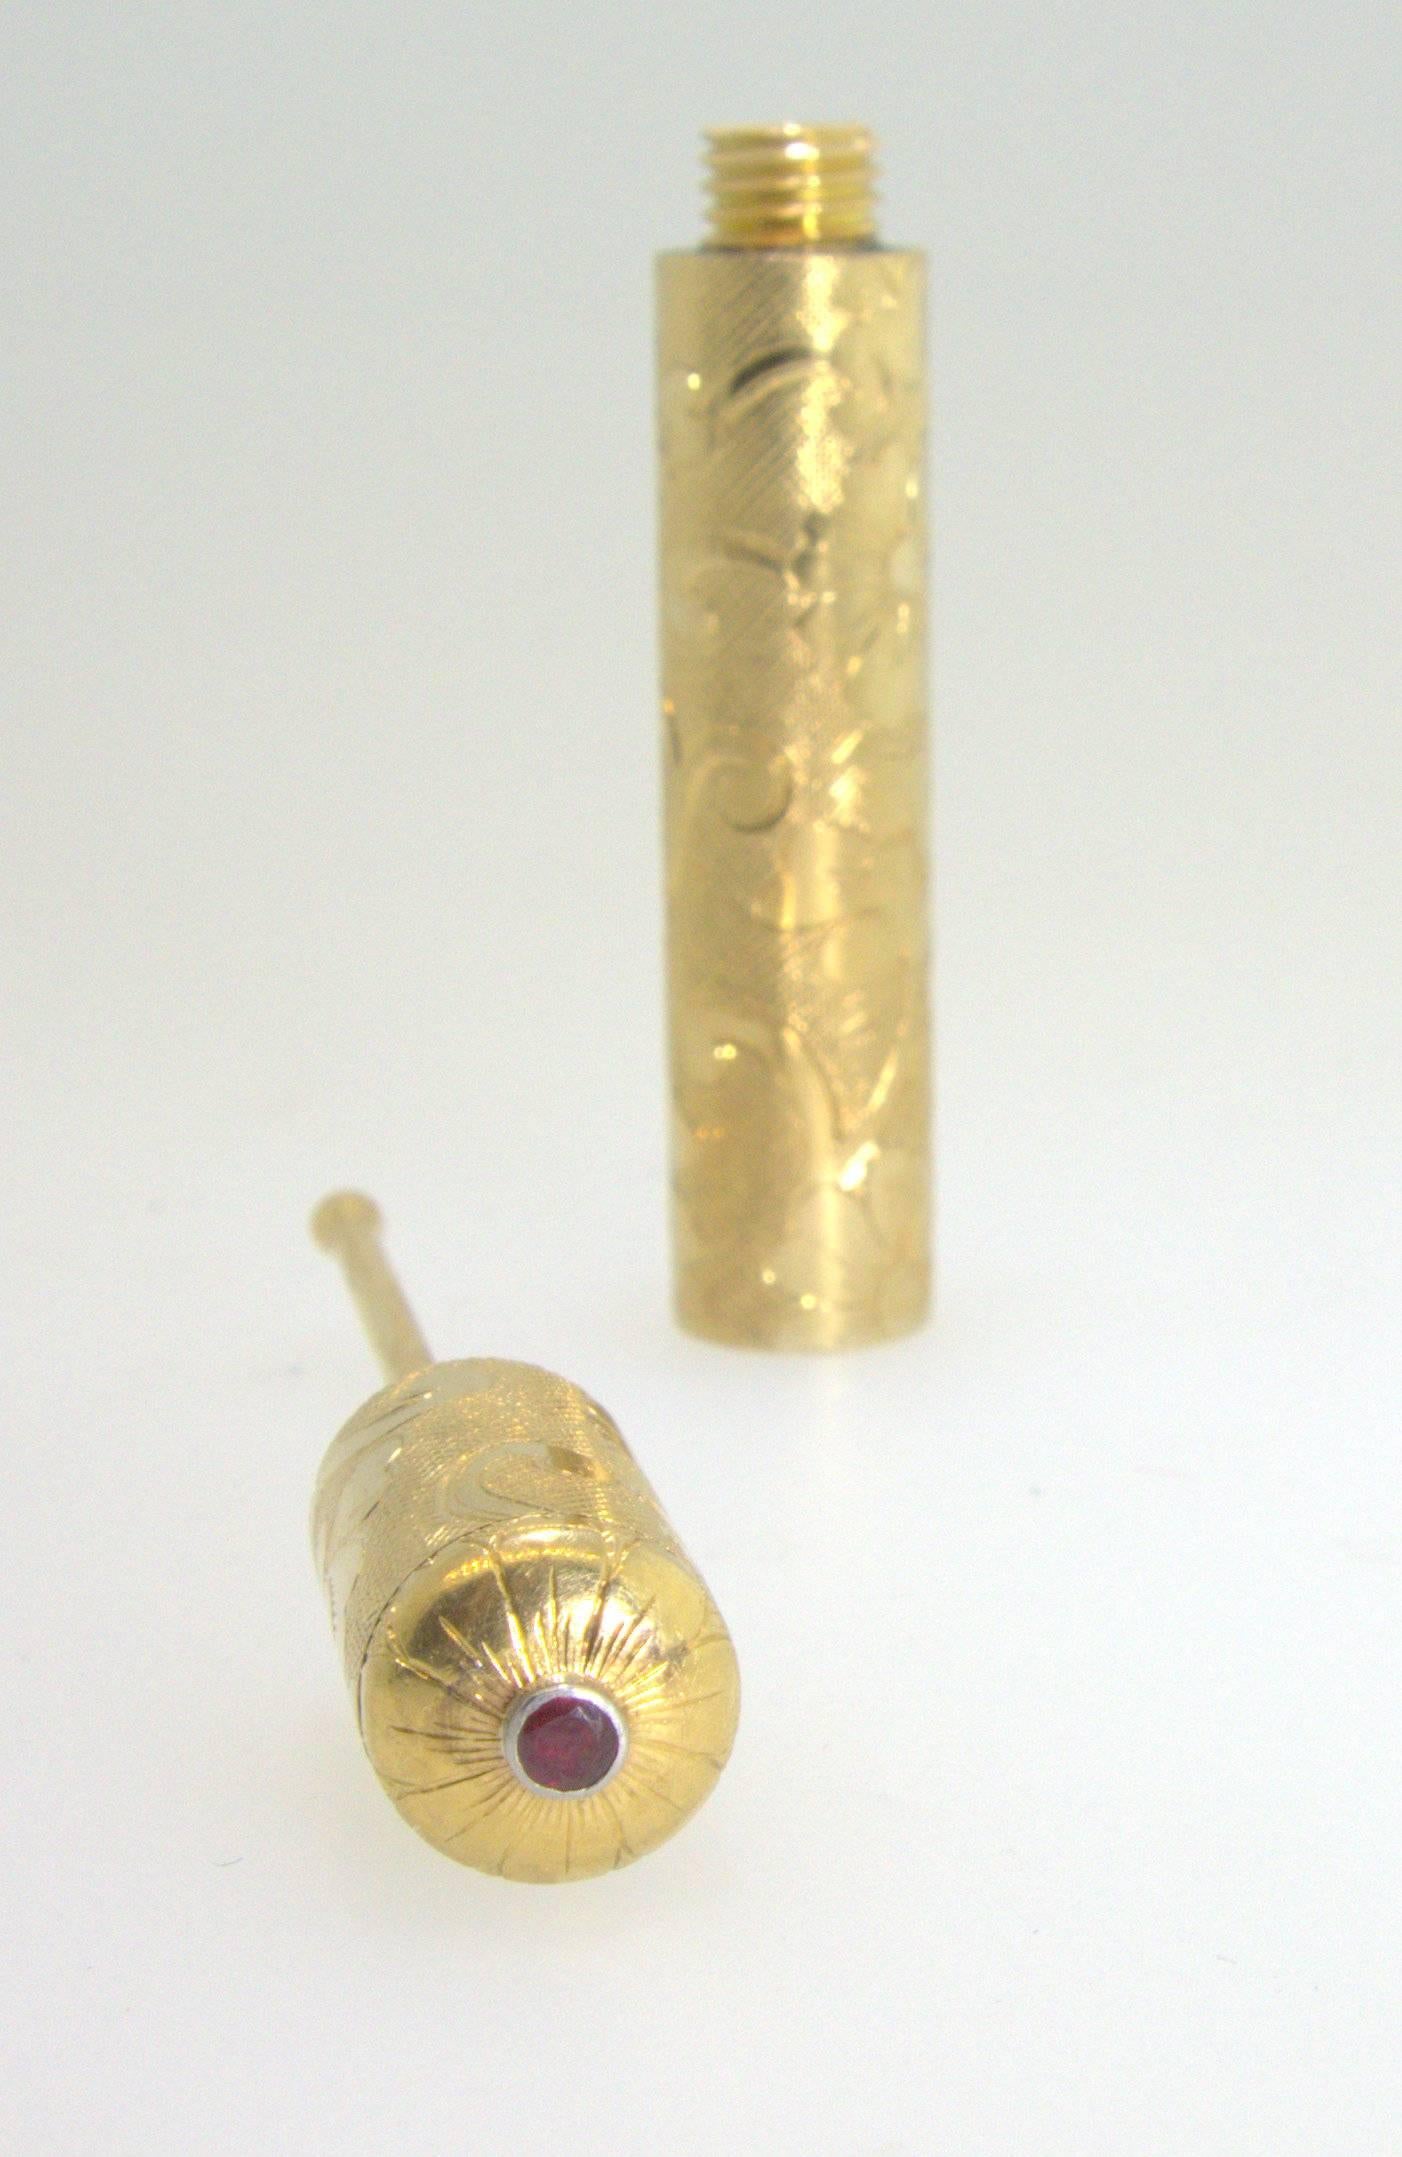 Circa 1950,  18K yellow gold finished with a small ruby, this perfume holder for the purse was made by the great house of Van Cleef & Arpel, France.  It is signed and numbered.  It measures over 3 inches long.